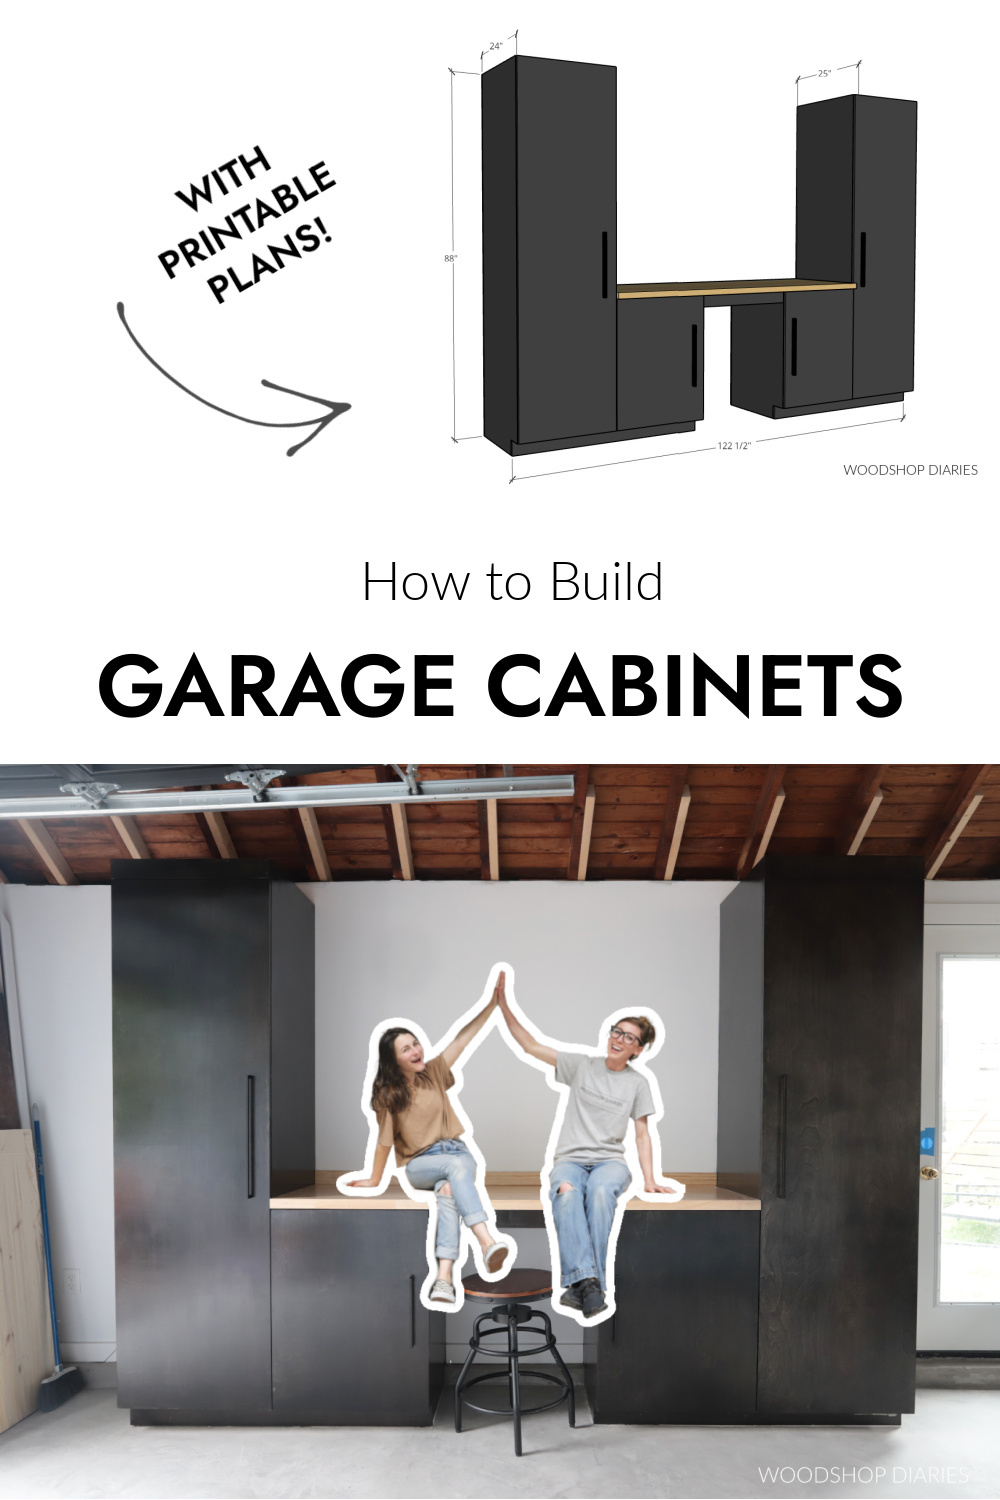 Pinterest collage image showing overall garage cabinet dimensions at top and Shara and Sam sitting on countertop on cabinets at bottom with text "how to build garage cabinets"